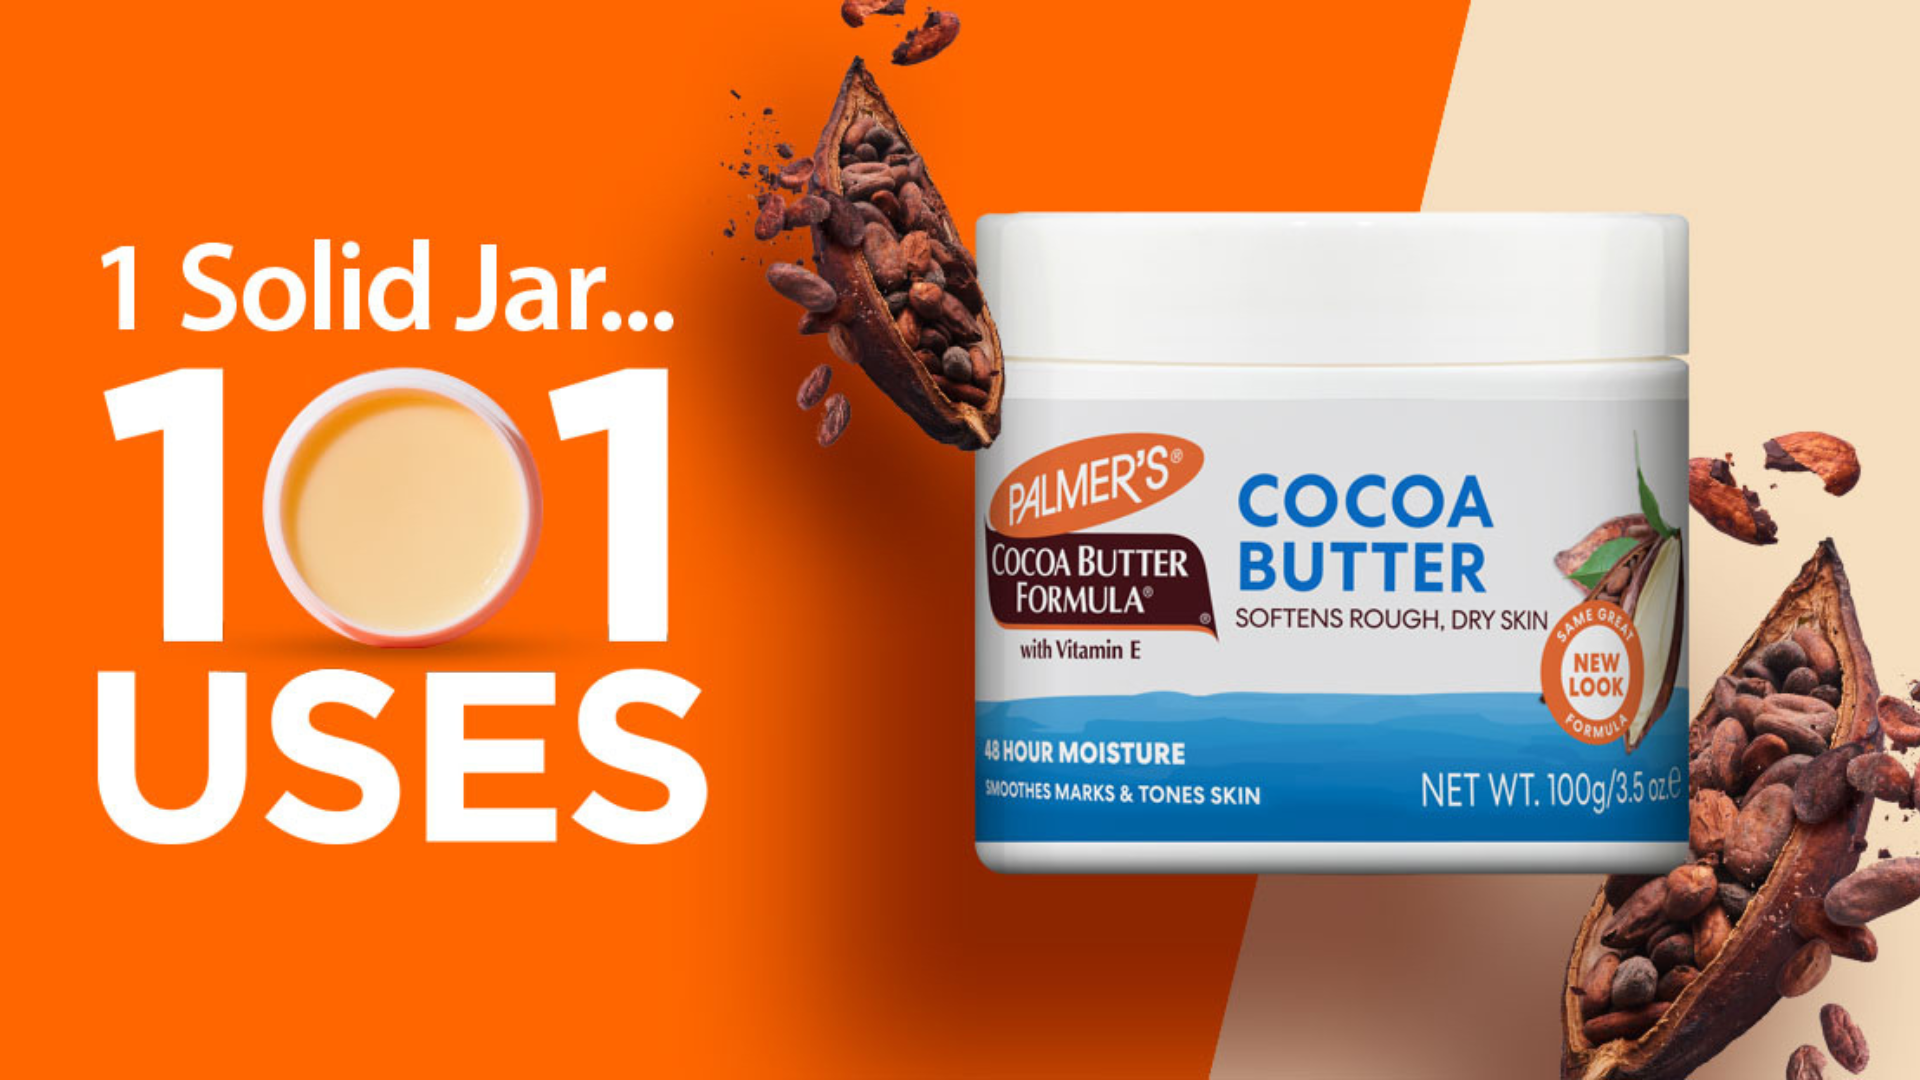 cocoa butter jar 101 uses